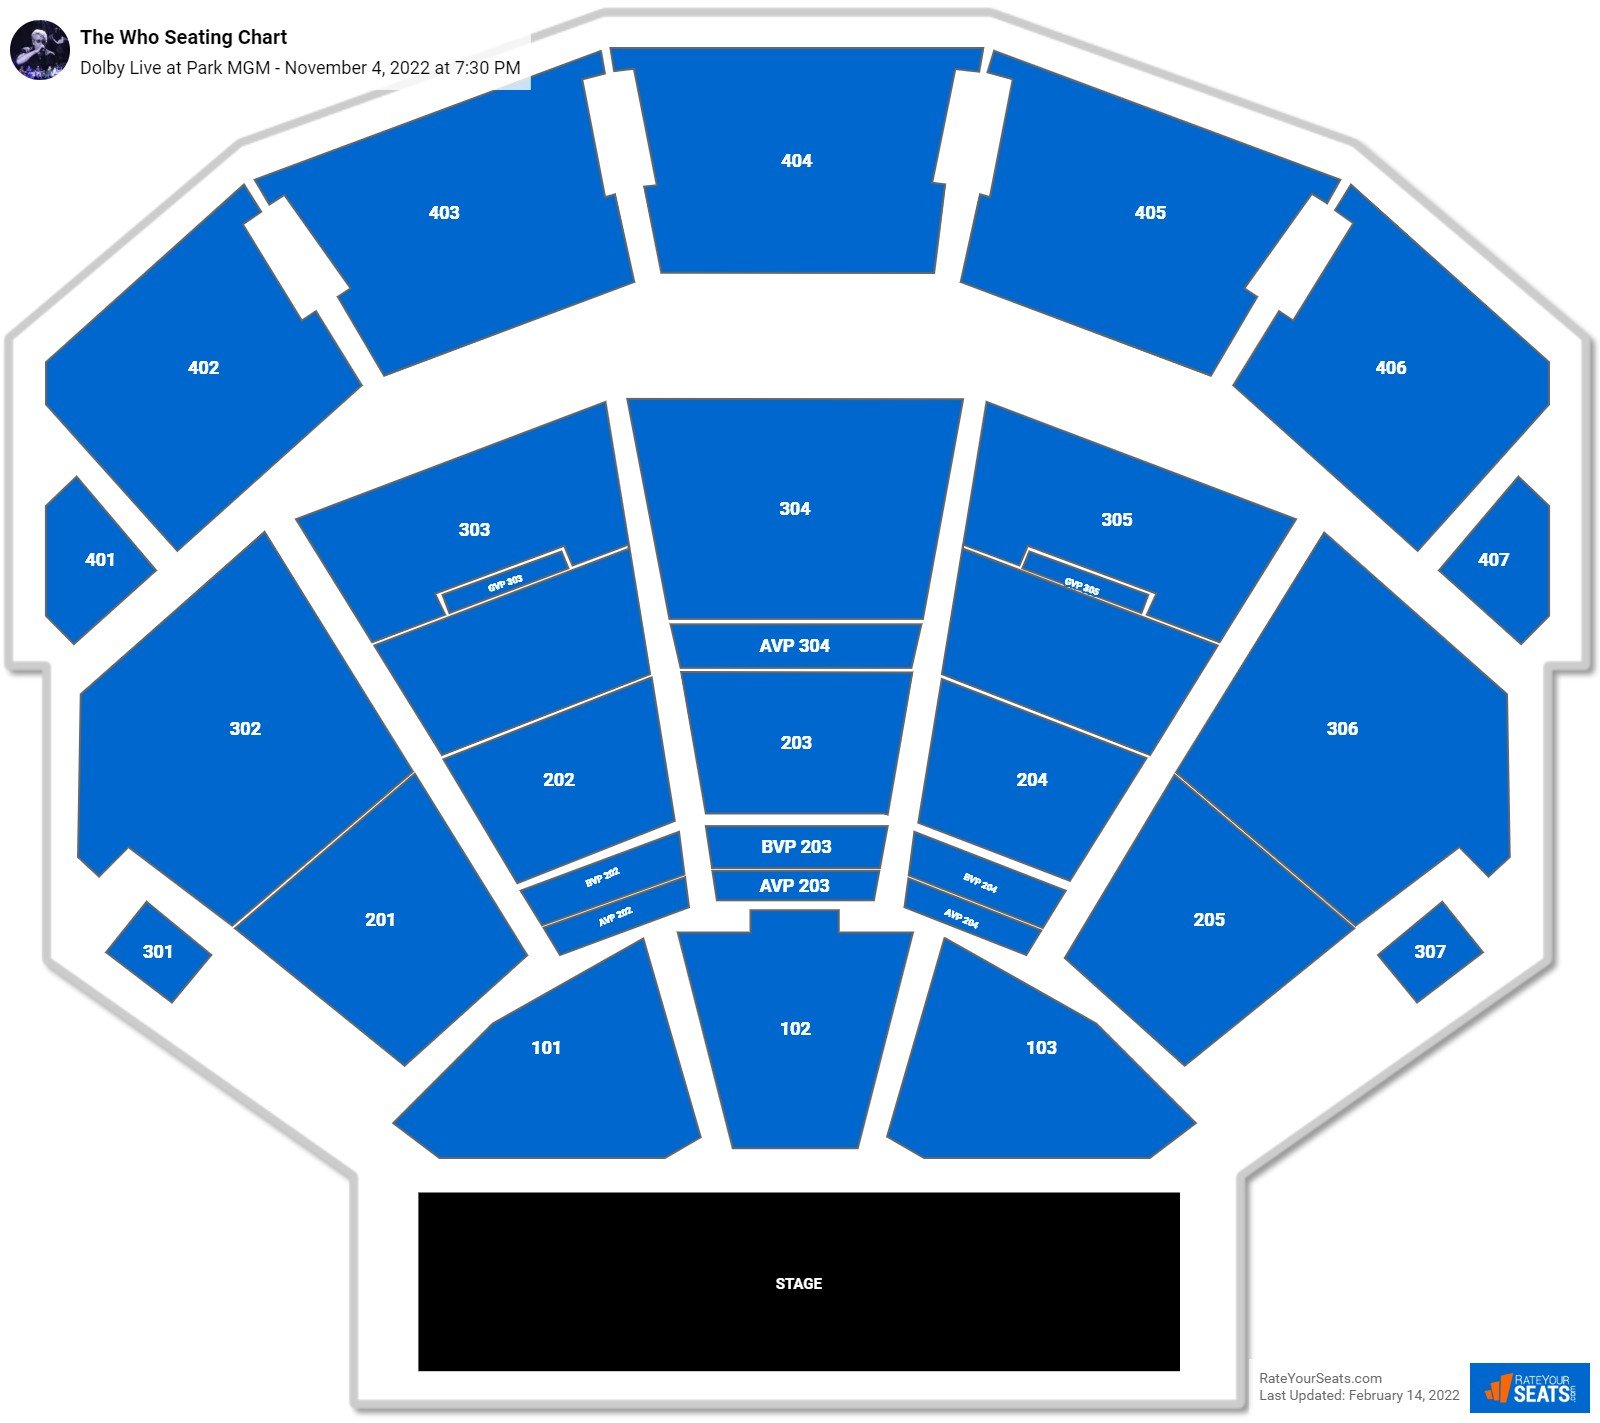 Dolby Live at Park MGM Seating Chart